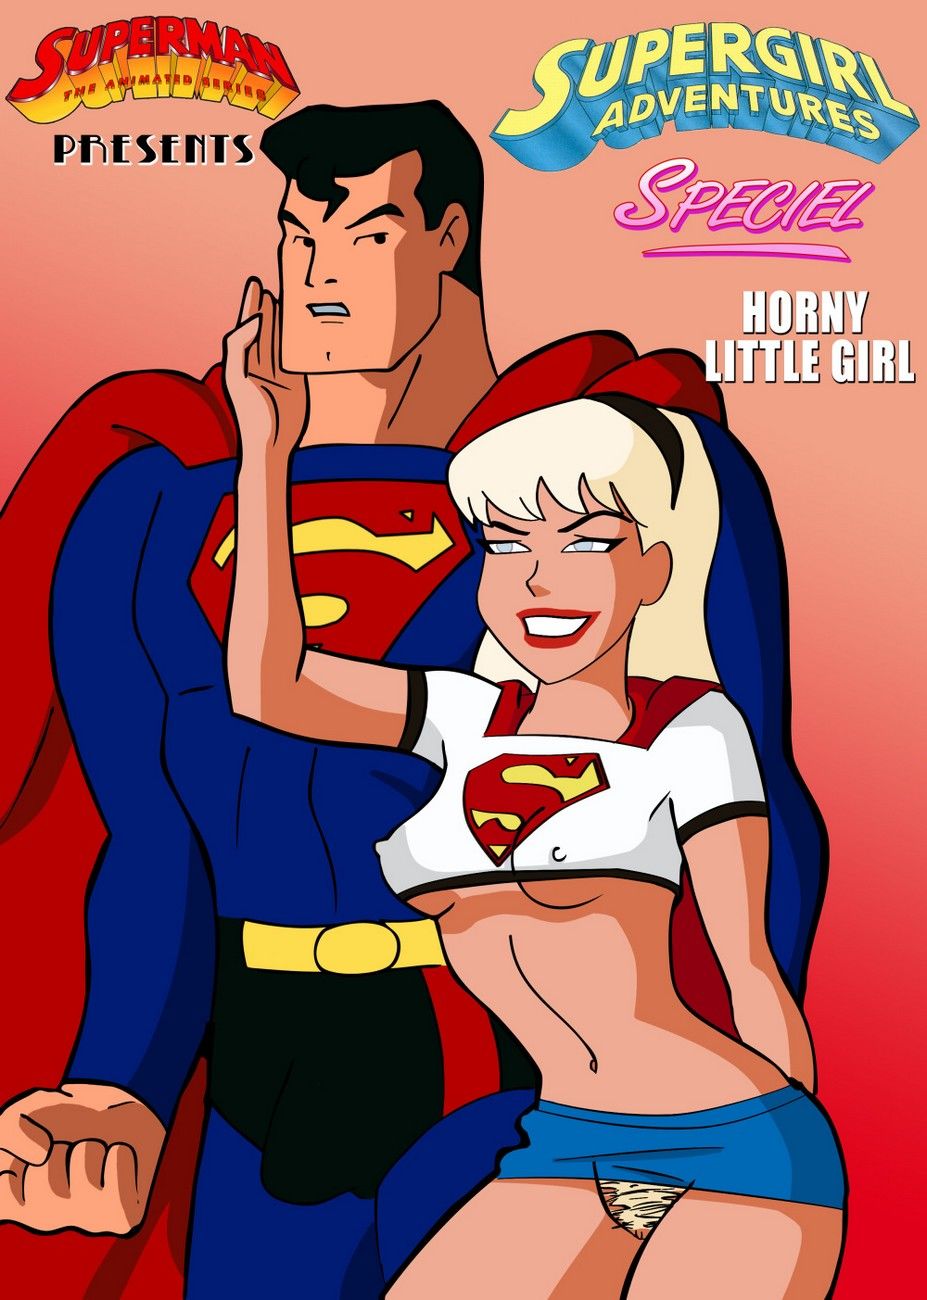 Supergirl Adventures 1 - Horny Little Girl page 1